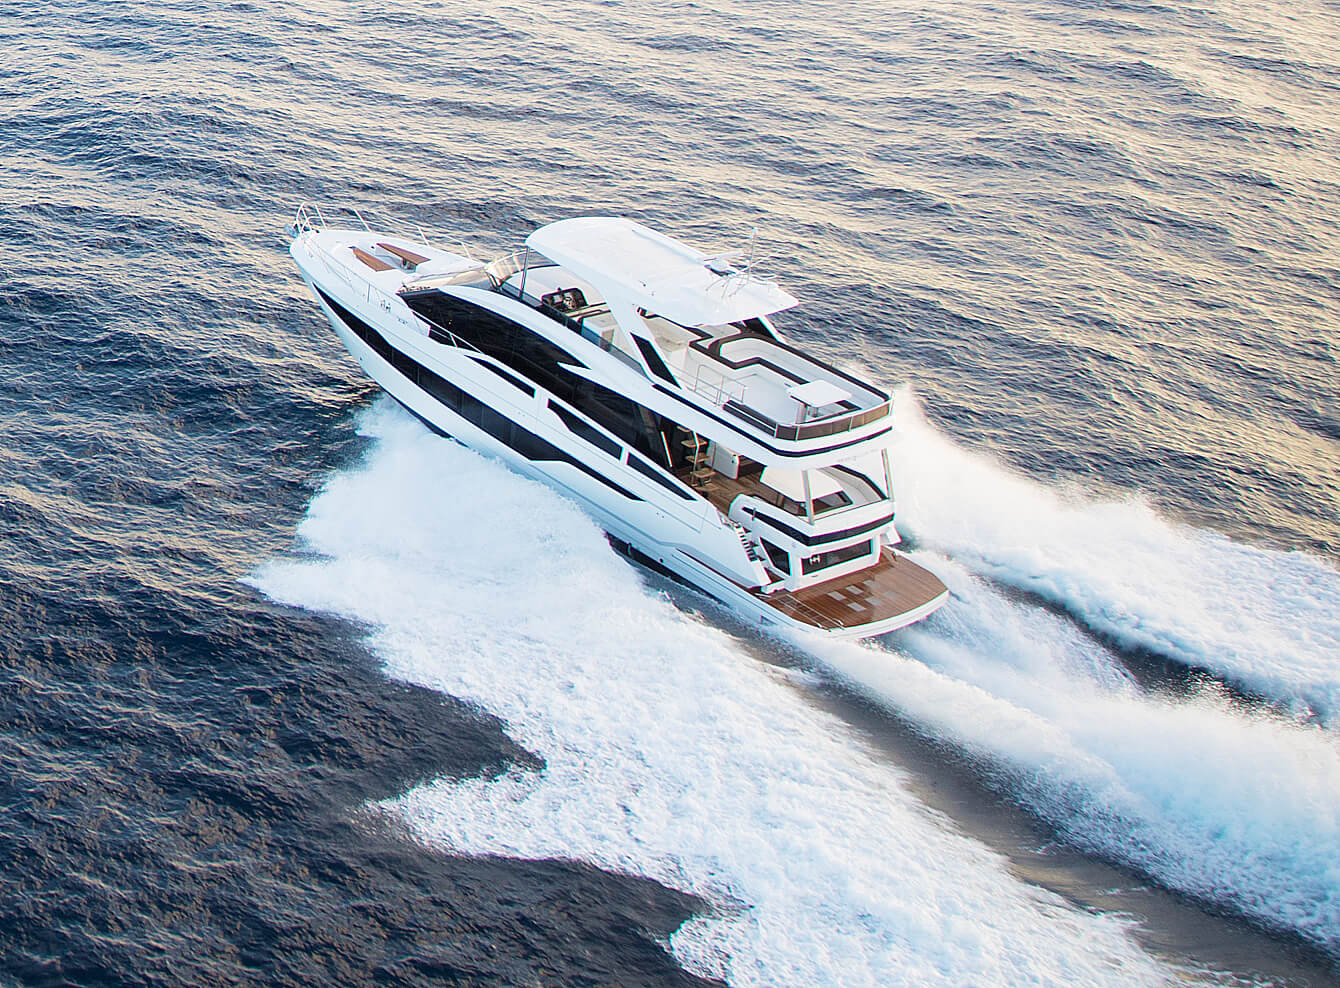 Galeon yacht cruising on open water with its wake behind it